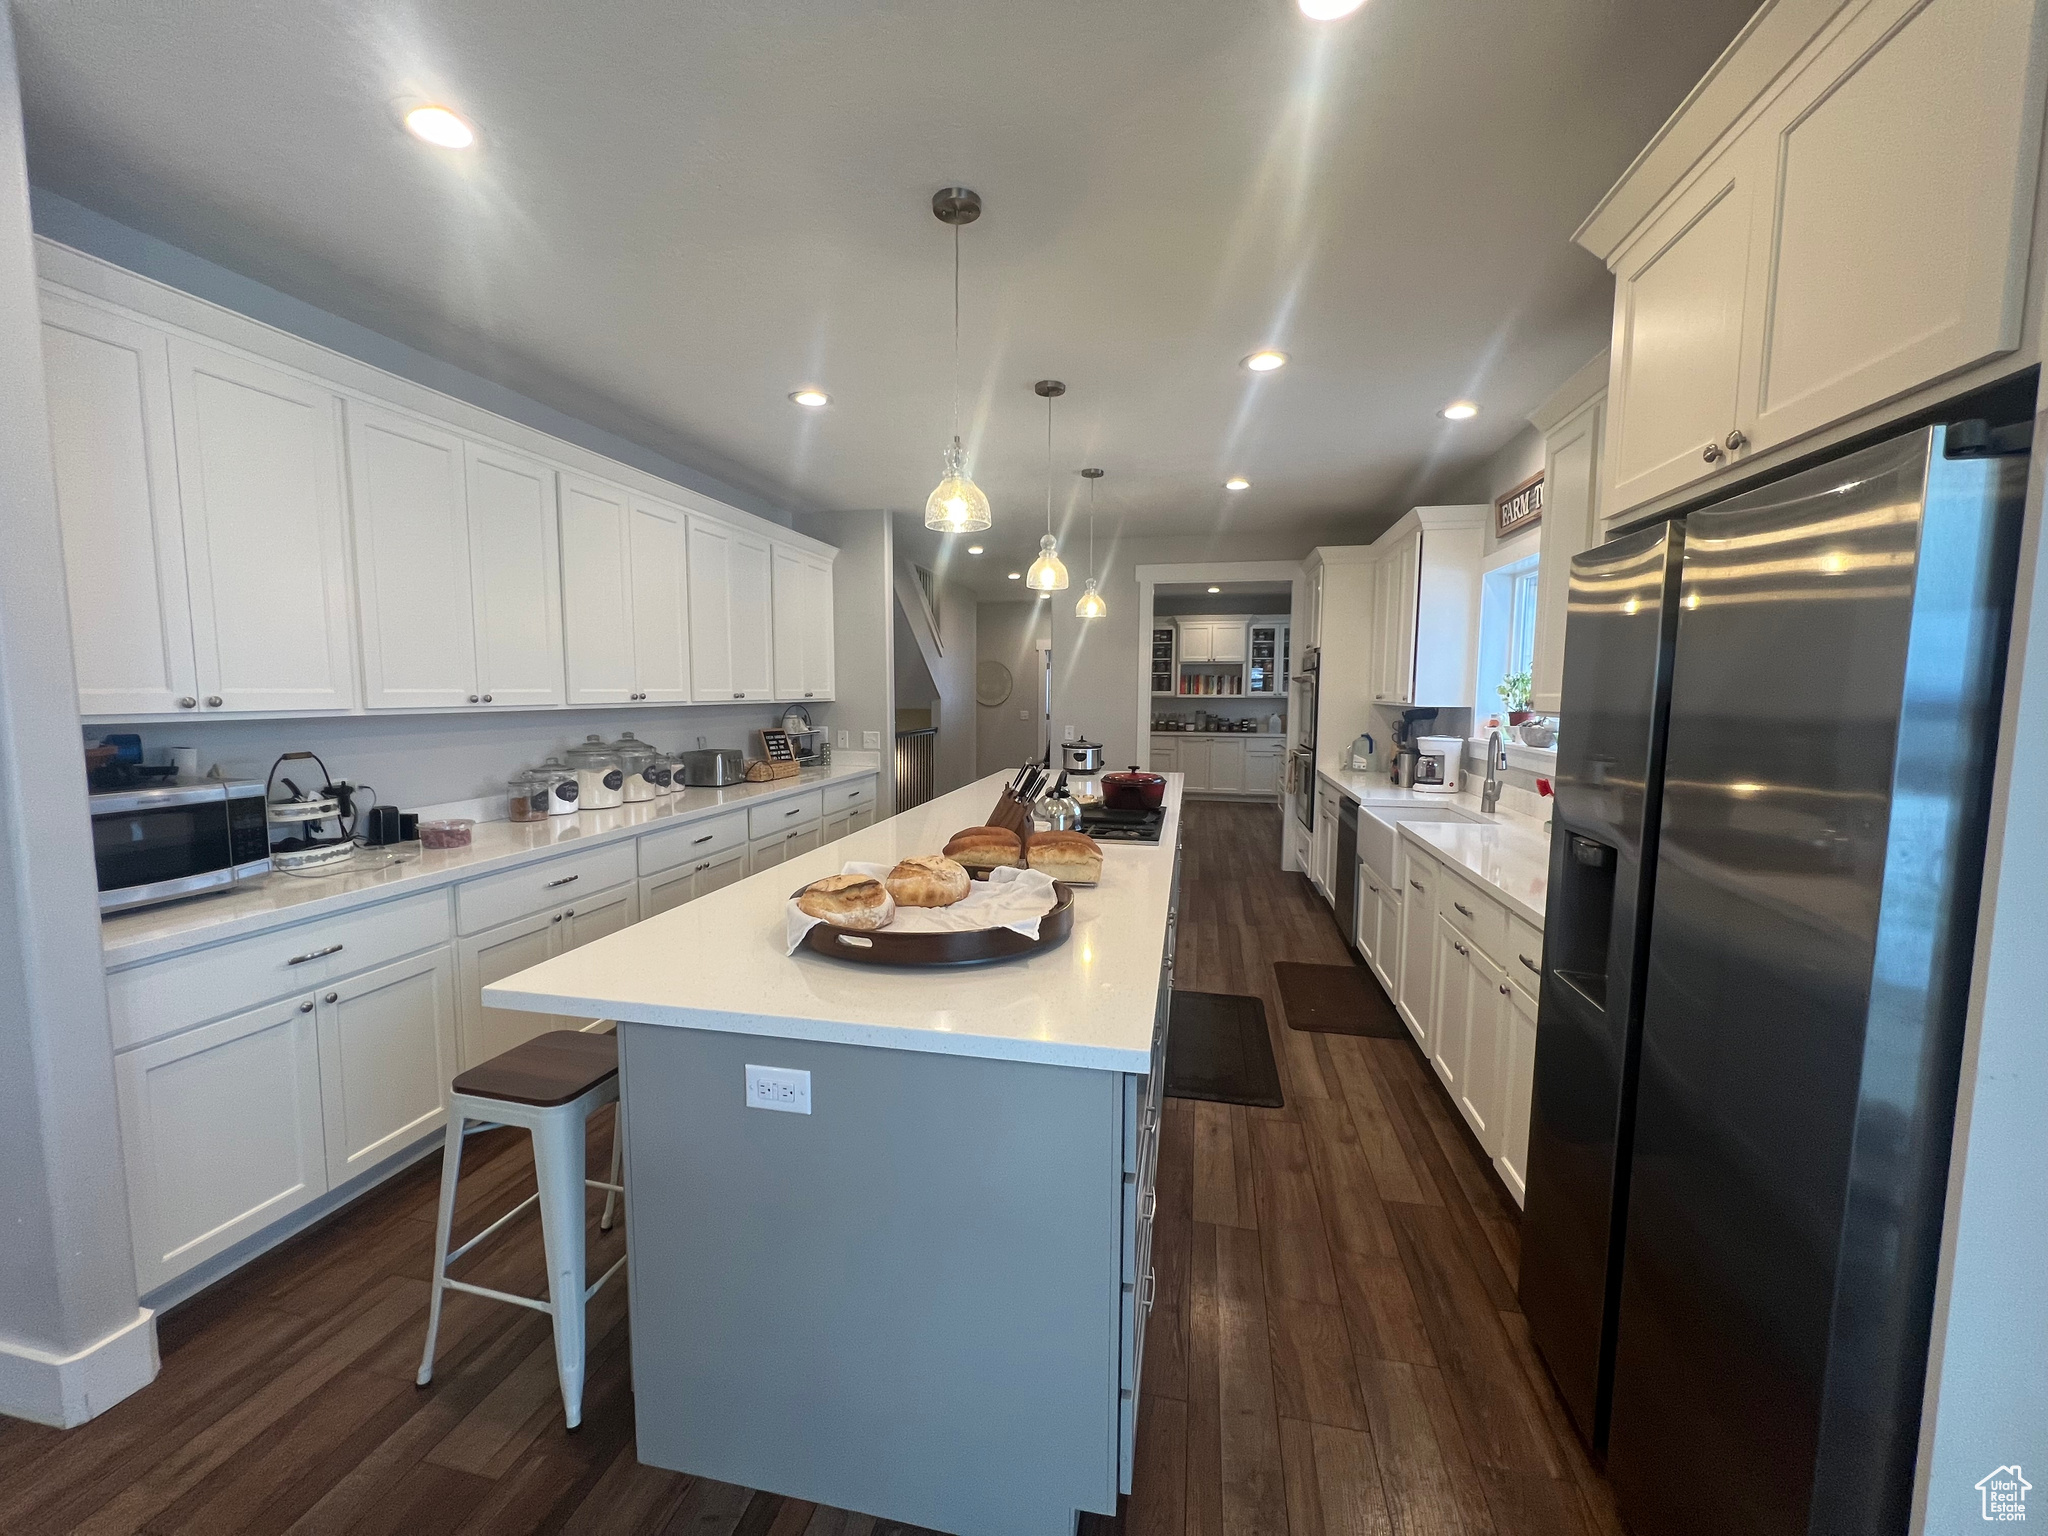 Kitchen featuring white cabinets, appliances with stainless steel finishes, an island with sink, dark hardwood / wood-style floors, and decorative light fixtures